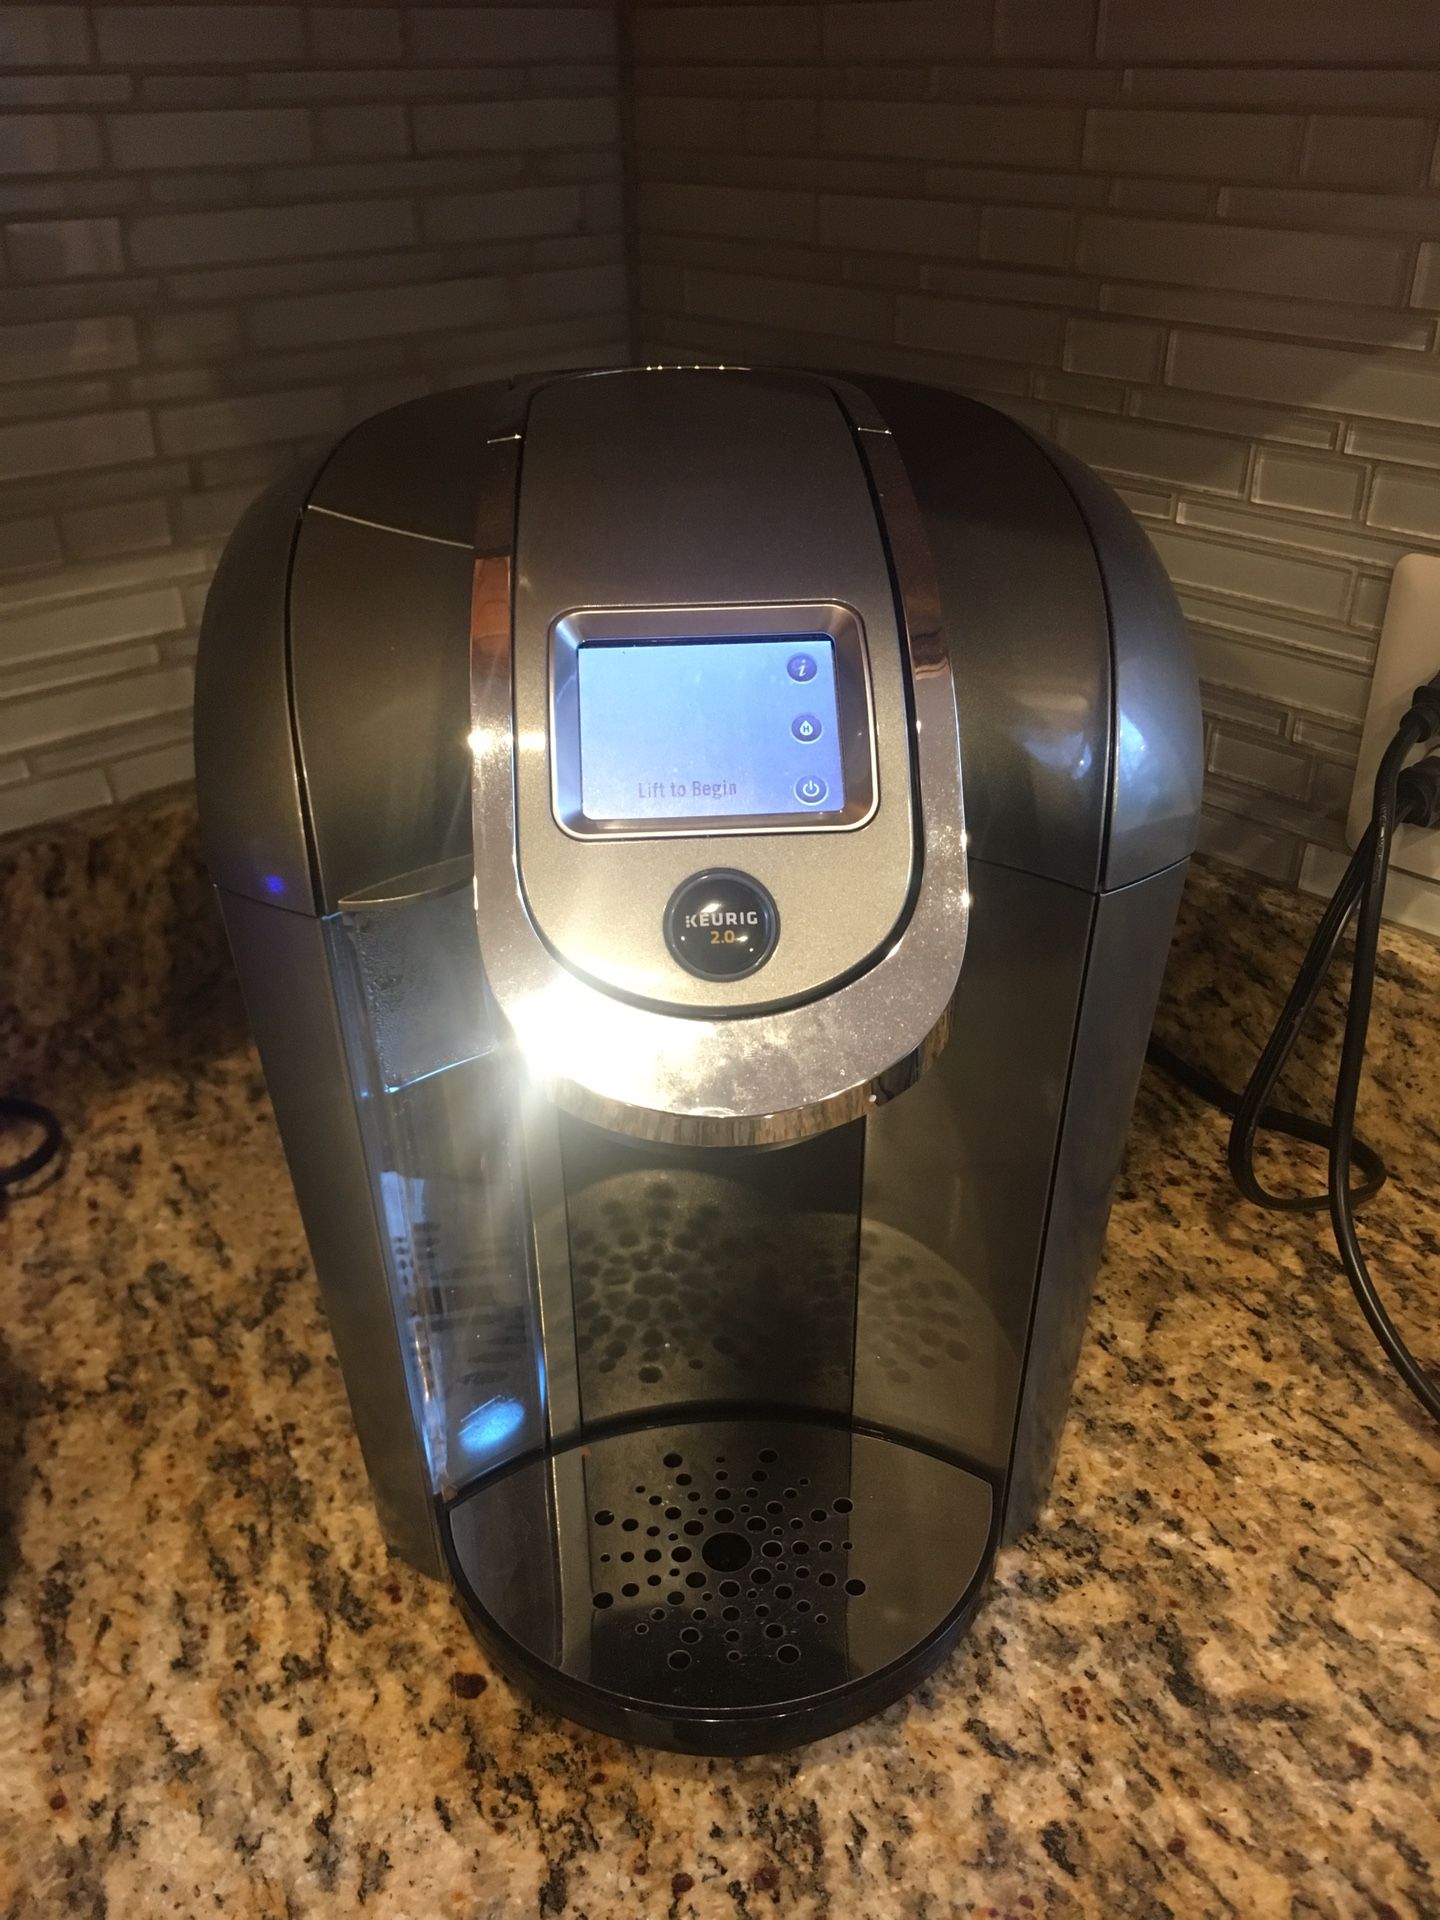 Keurig 2.0 coffee and carafe maker. Includes reusable cup and filters.